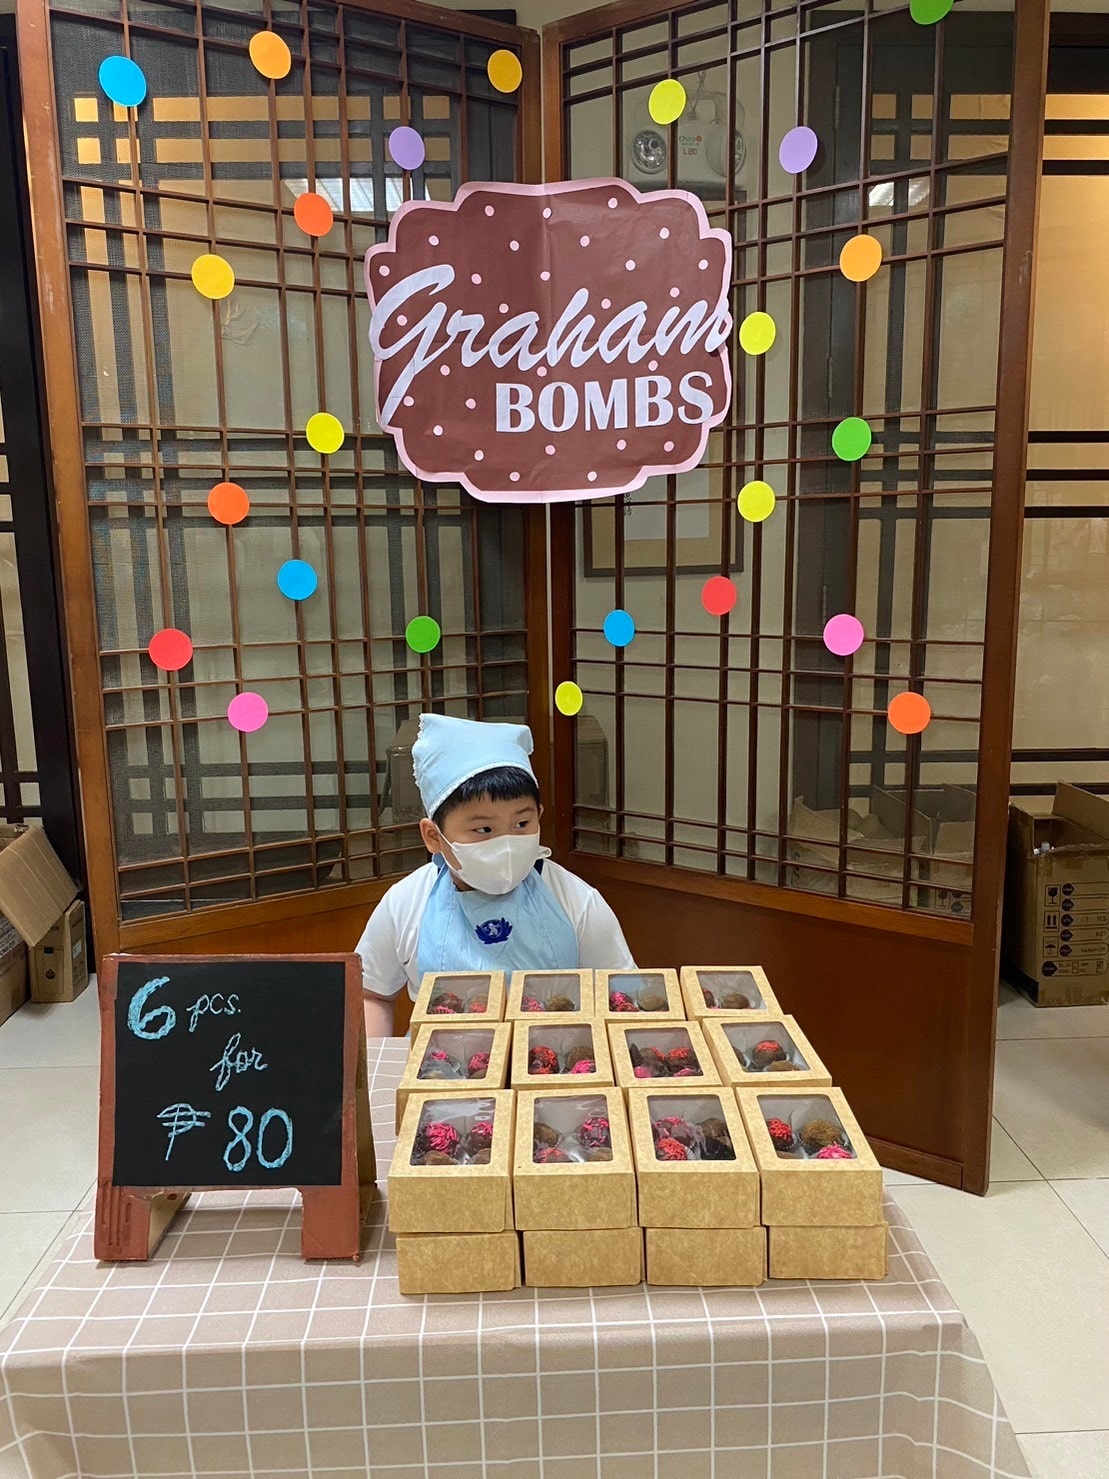 Graham balls are one of the bestselling products at the preschool kiddie market.【Photo by Matt Serrano】